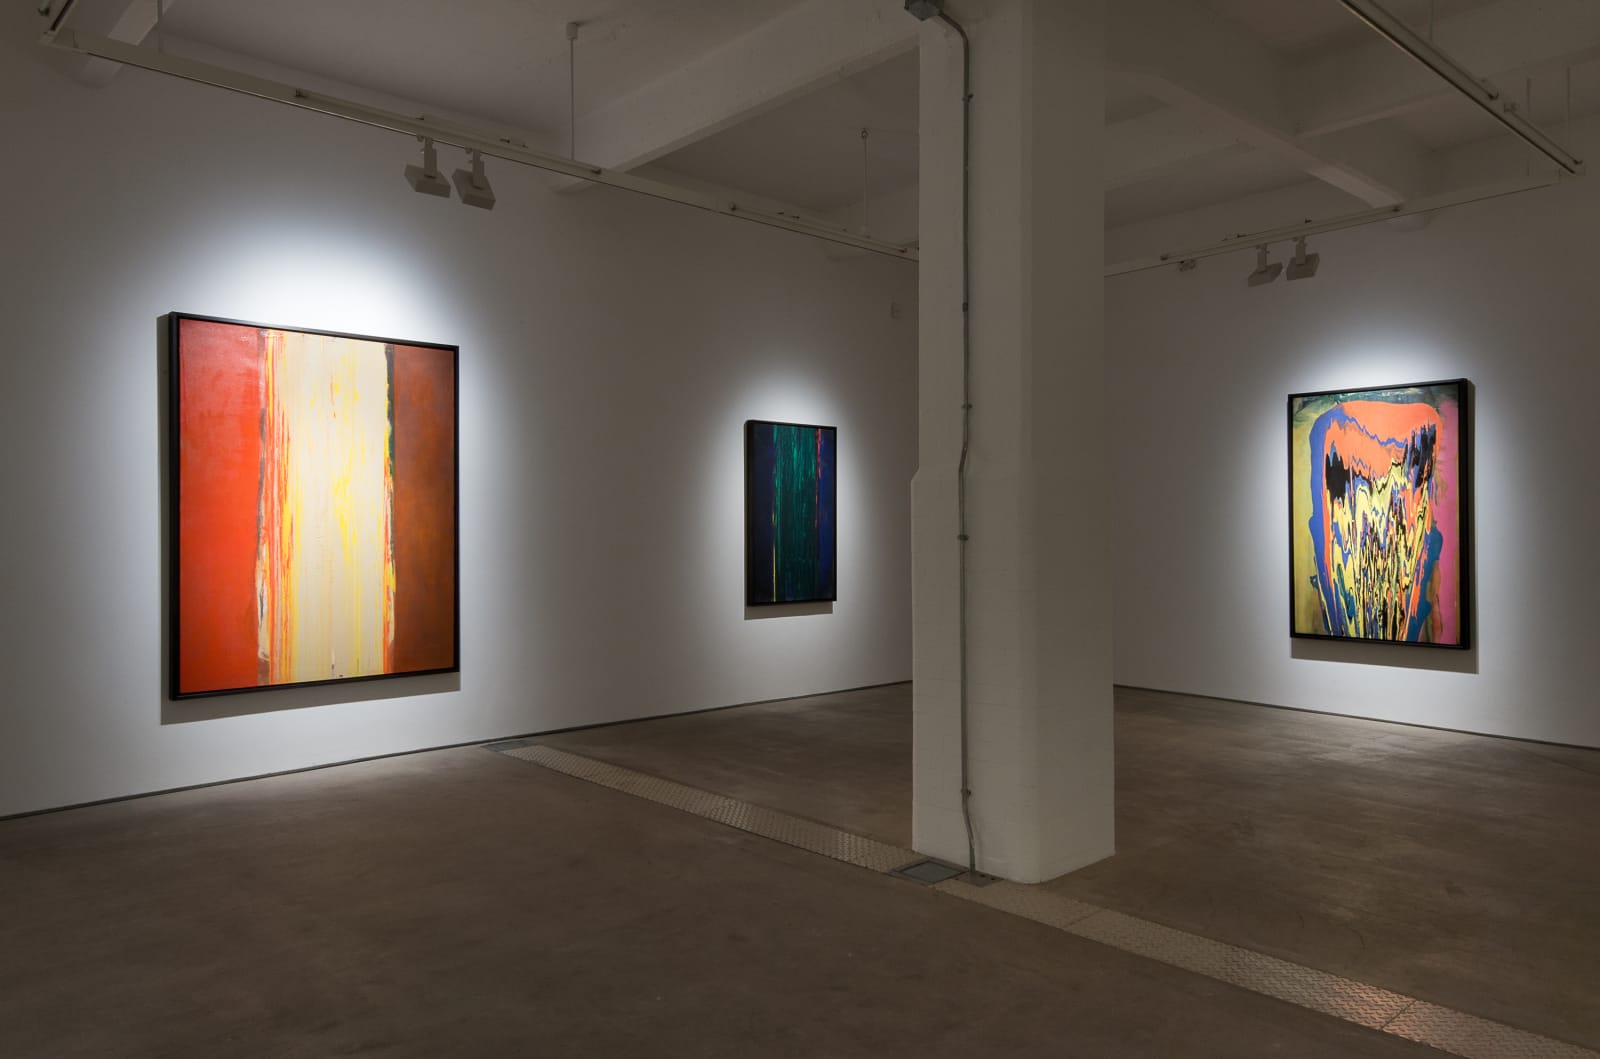 Frank Bowling, Installation view 'The Poured Paintings', Hales London, 11 September - 24 October 2015  Frank Bowling Installation view 'The Poured Paintings', Hales London, 11 September - 24 October 2015